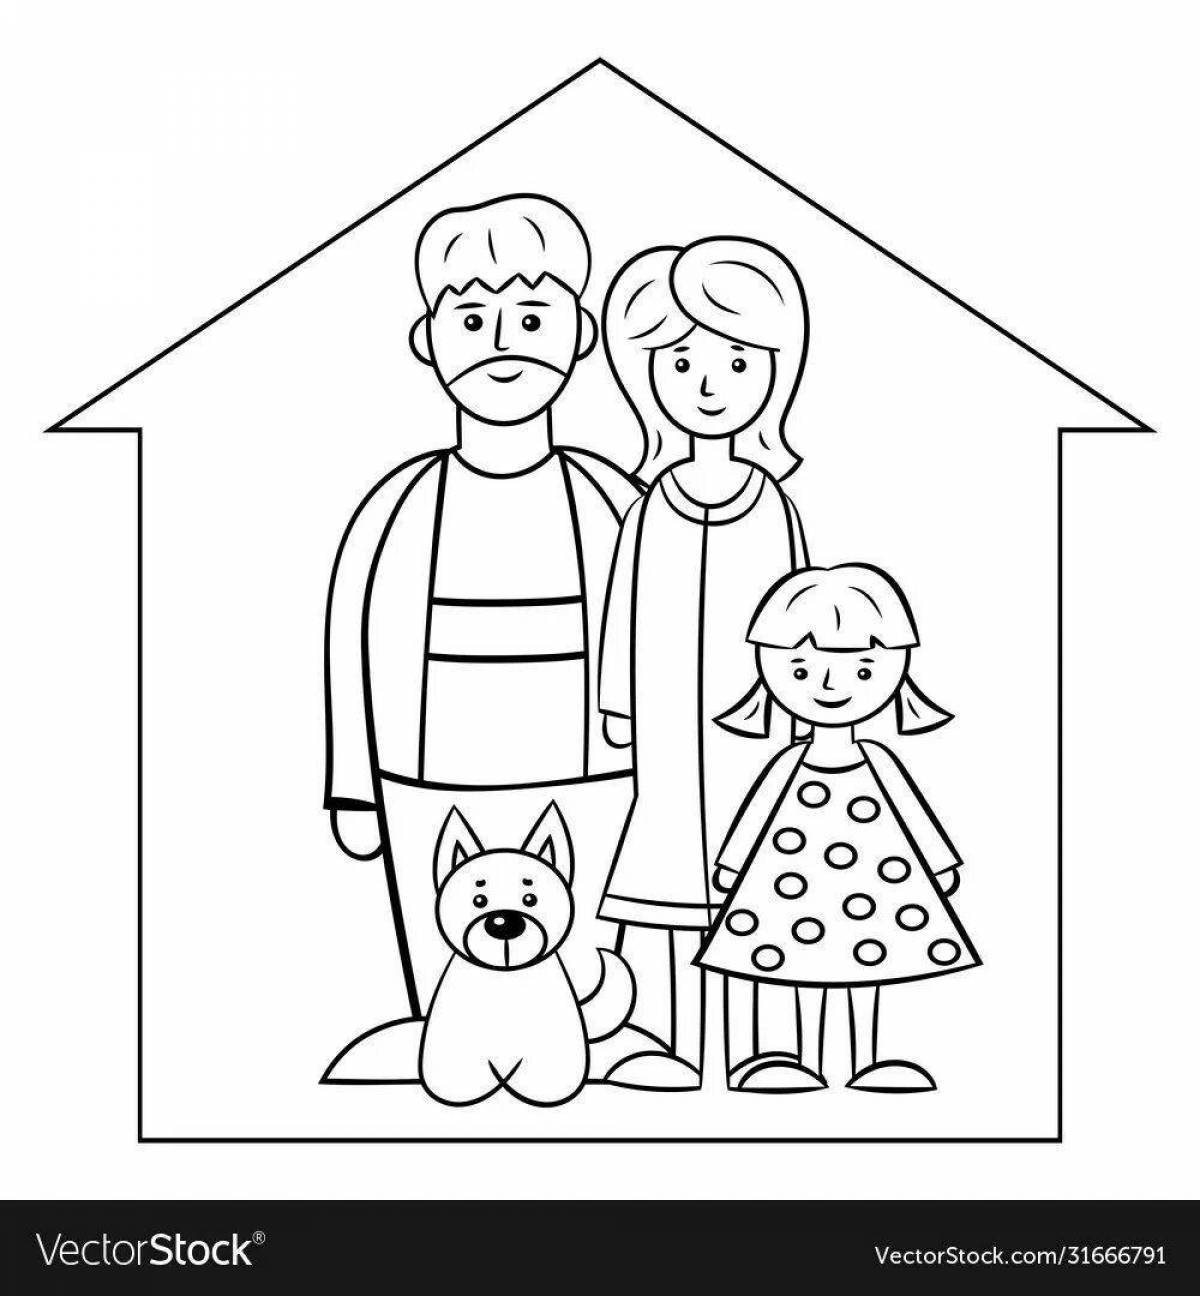 Great family of 5 coloring pages